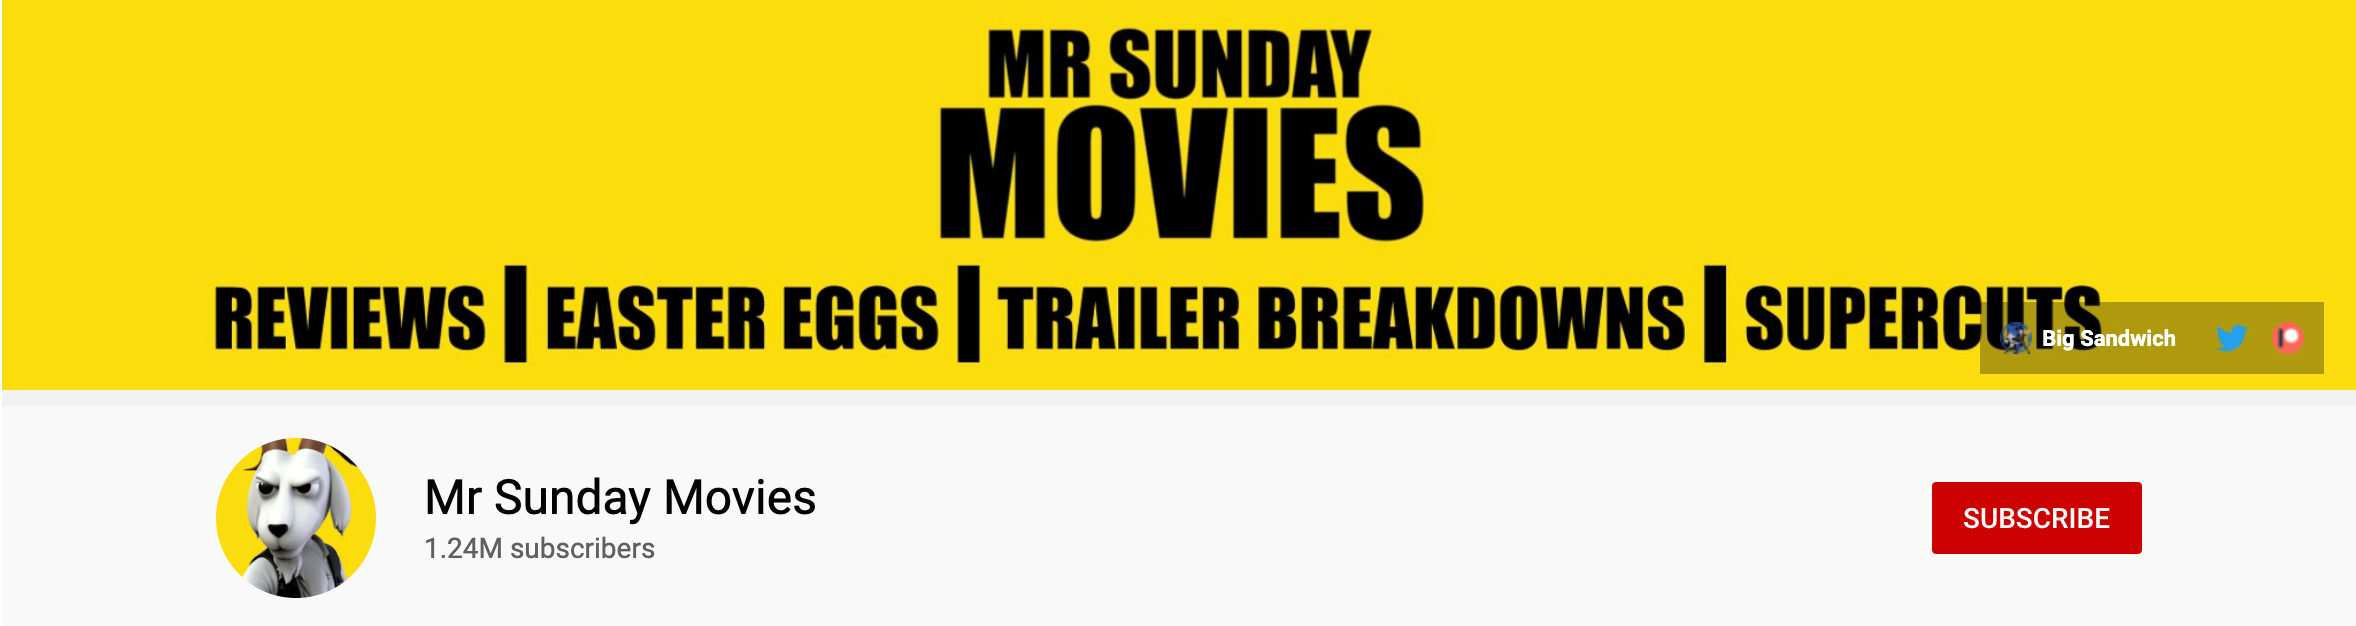 Mr Sunday Movies banner on YouTube